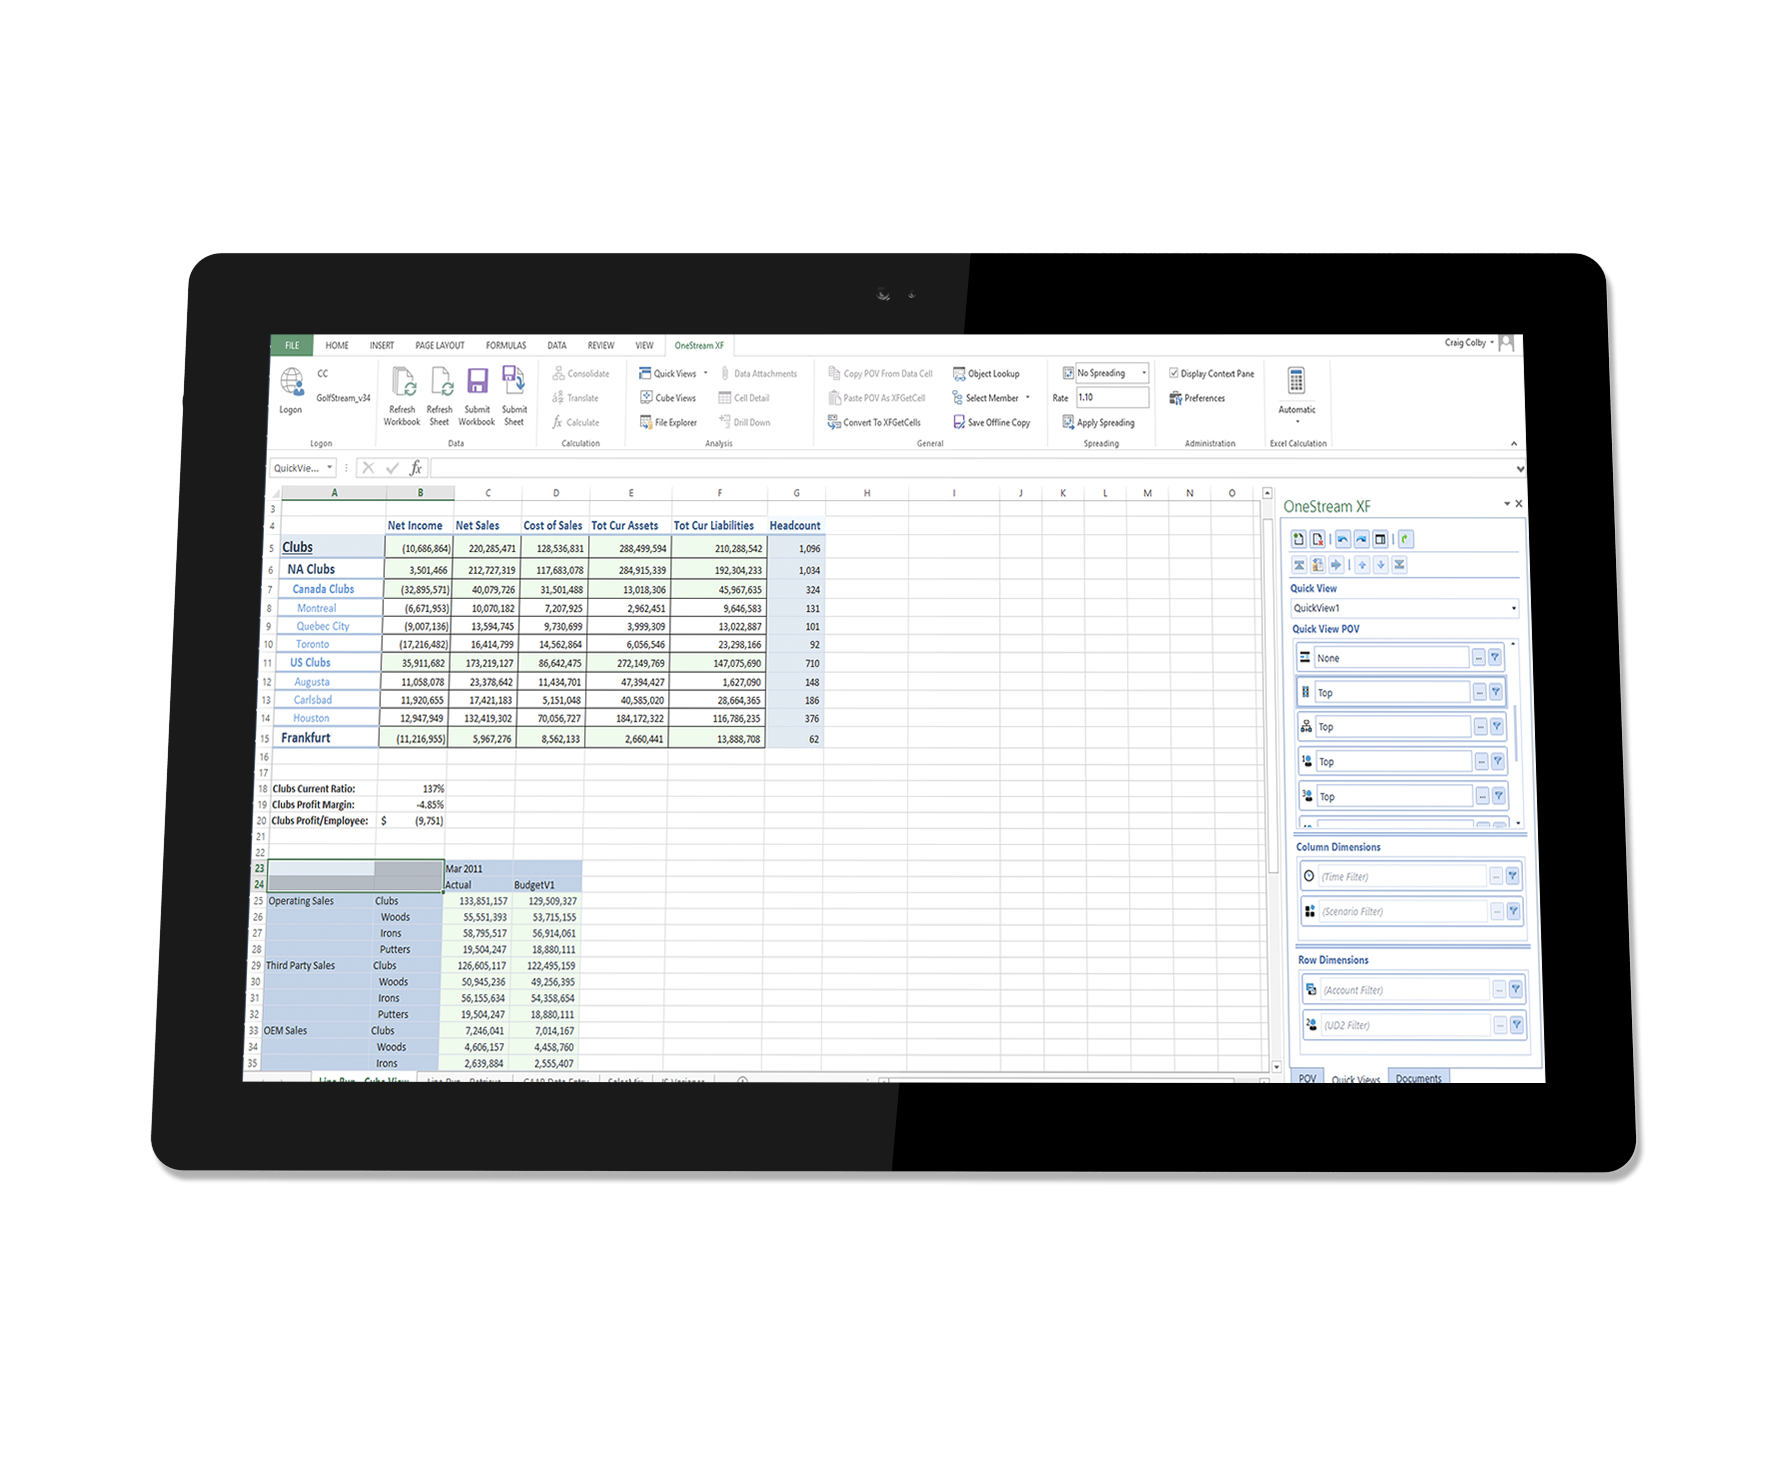 OneStream Software - Excel based work environment